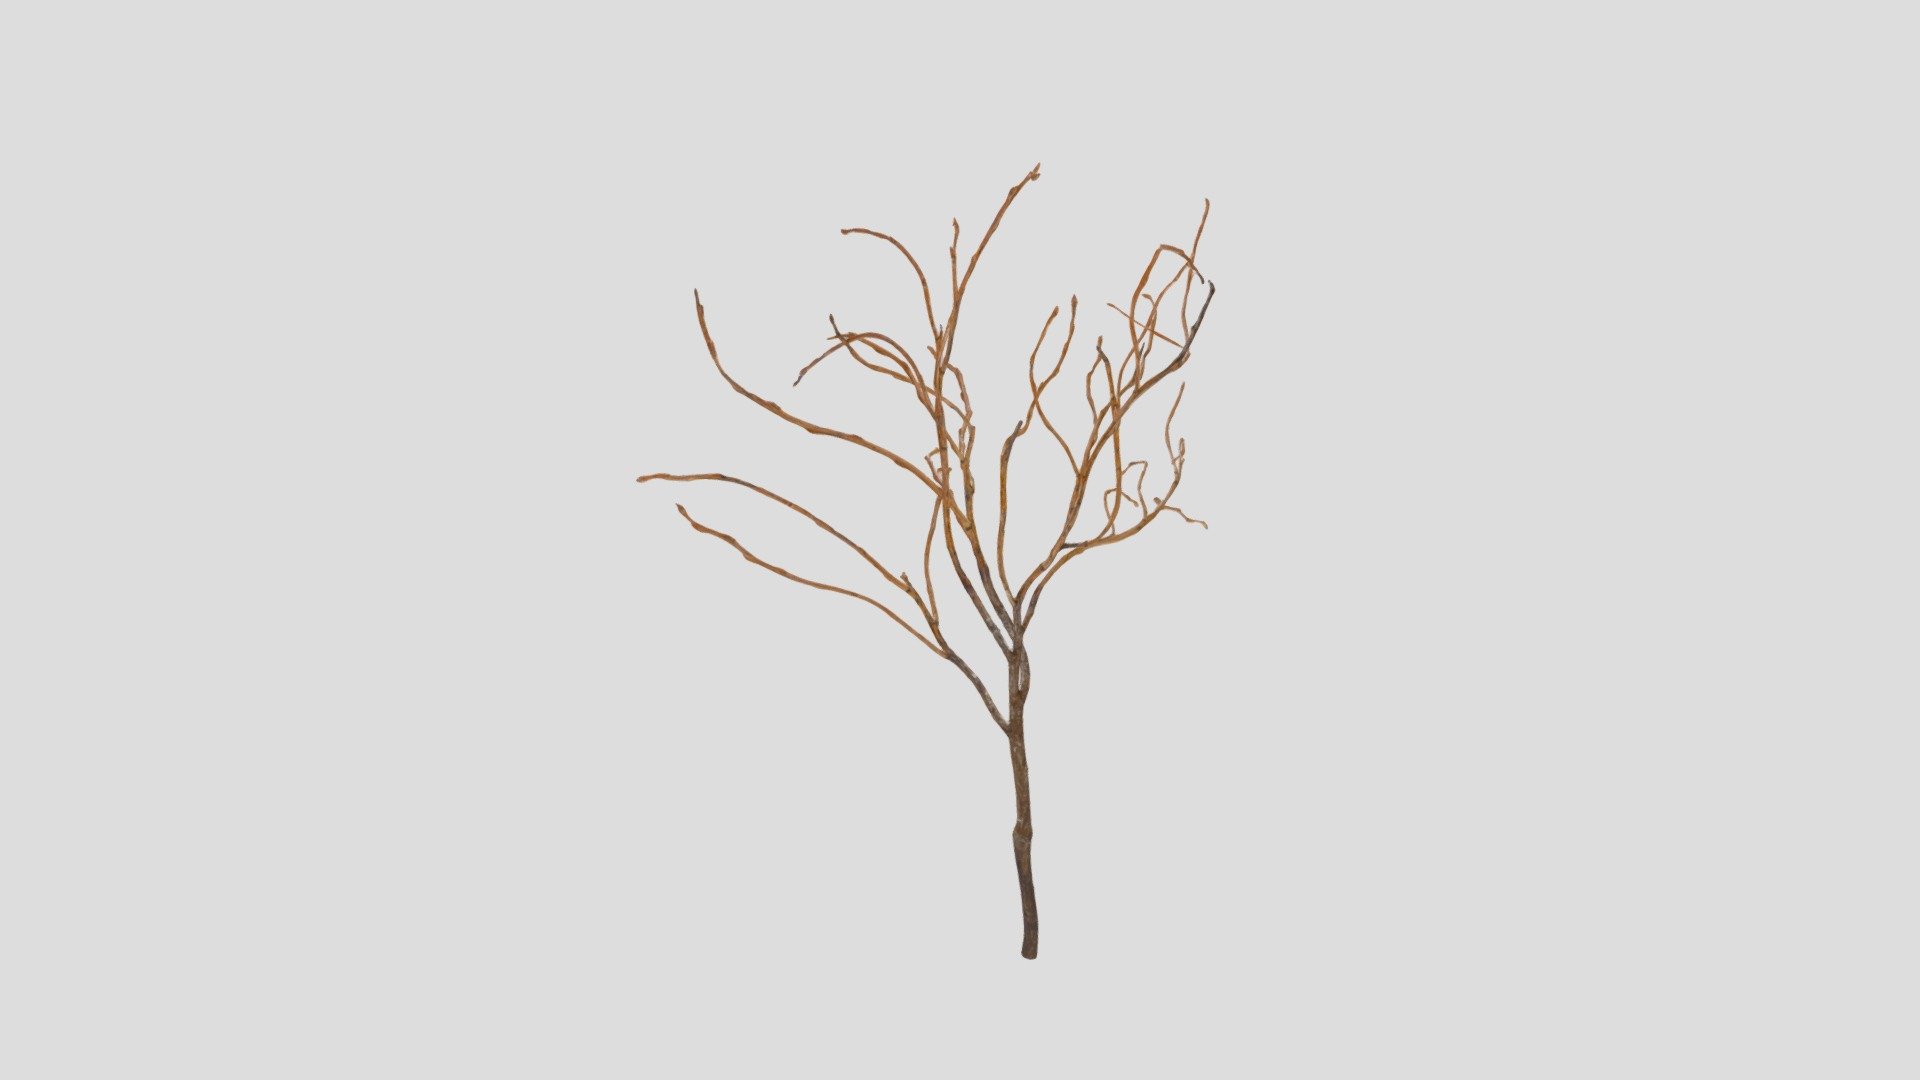 Photogrammetry done with Agisoft Metashape from photos of a dried up blueberry branch from DSLR camera photos 3d model